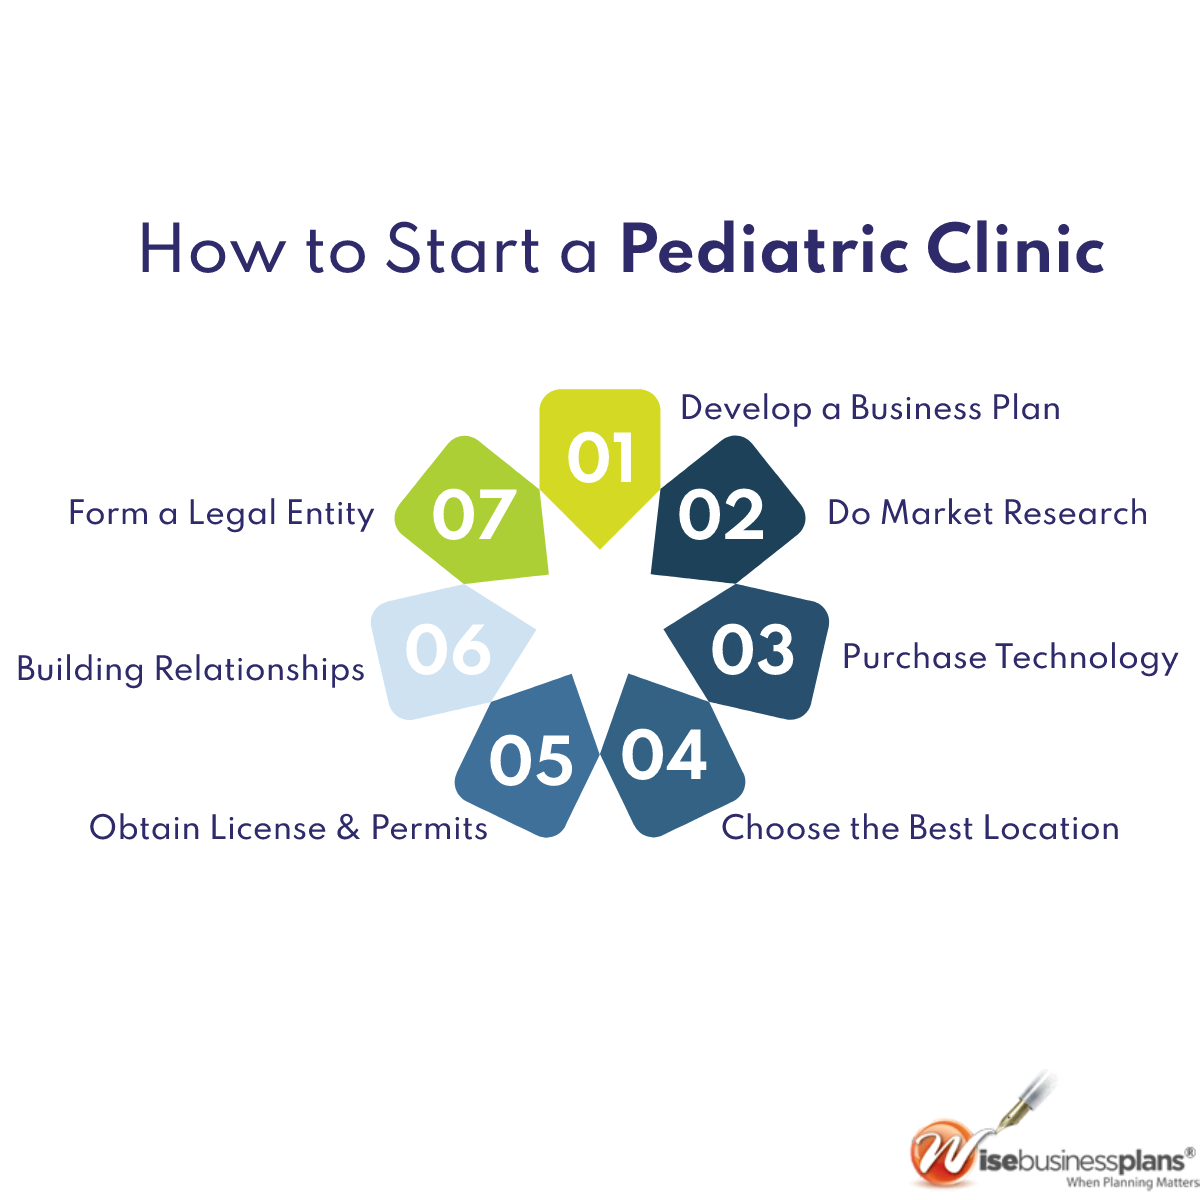 How to start a pediatric clinic